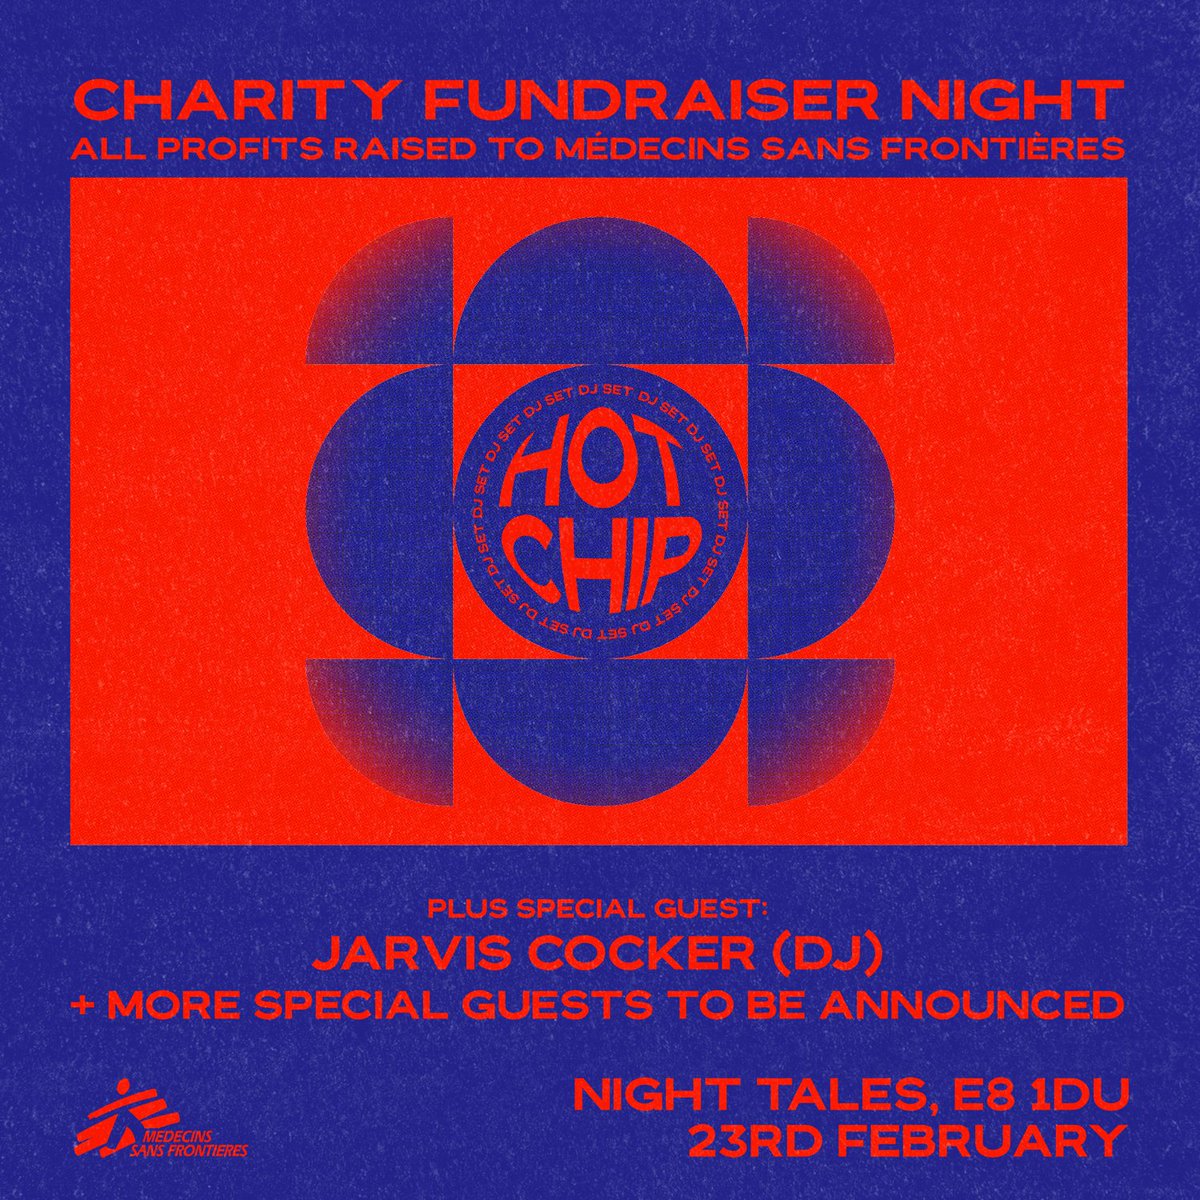 TONIGHT, NIGHT TALES LONDON 10-11: Jarvis Cocker (DJ) 11-2: HOT CHIP (DJ) 2-3: Elkka Advance tix sold out. Limited tickets & donations to @MSF_uk on the door! See you tonight x